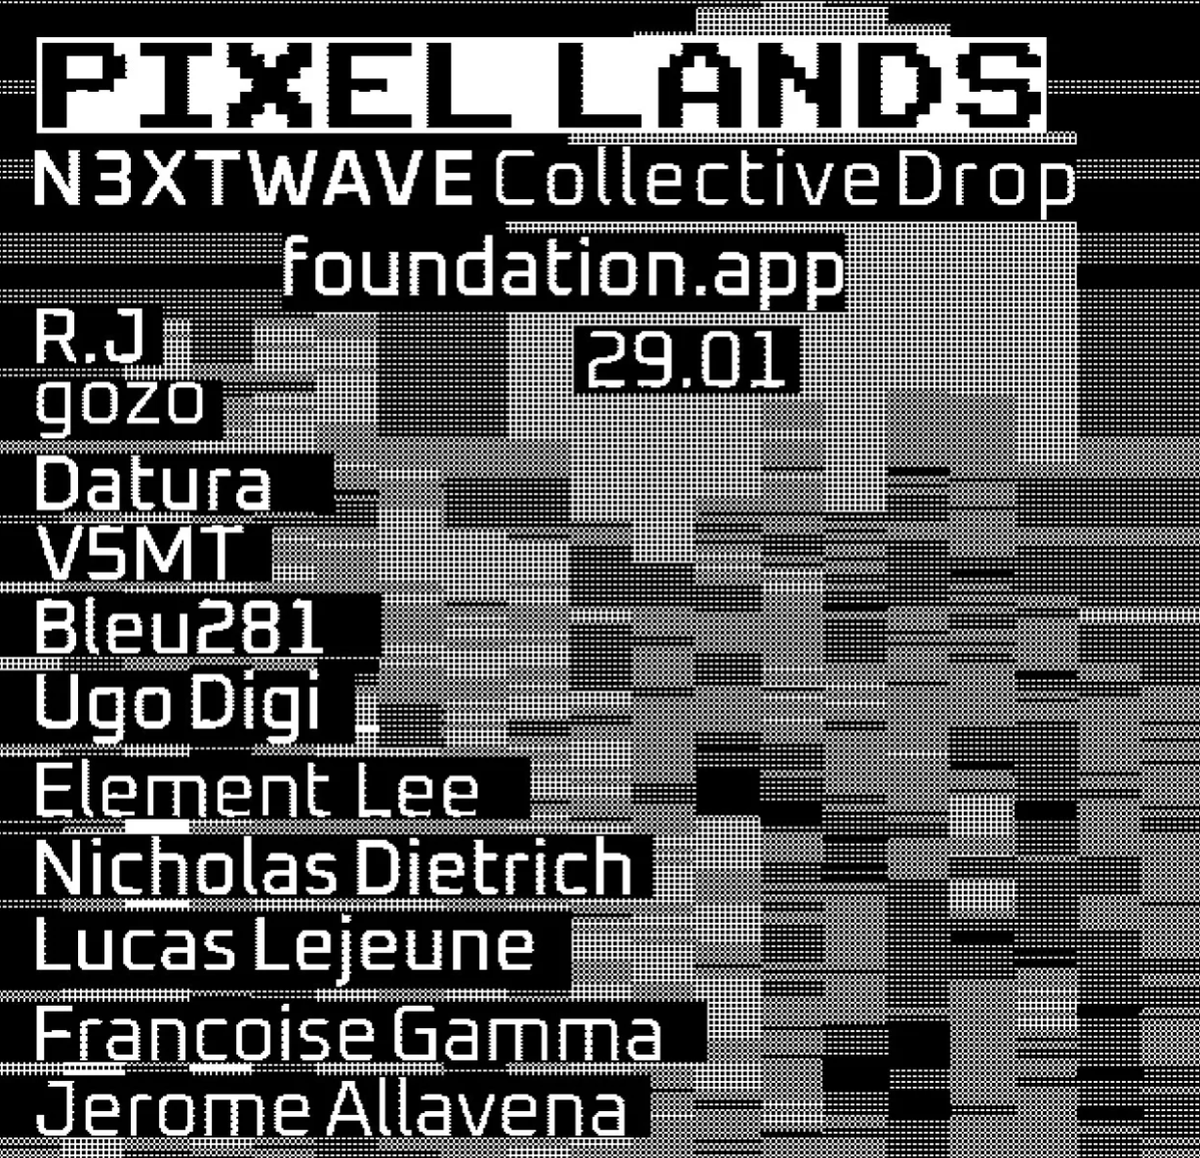 New collective drop on @foundation by @n3xtwave 
Link below to discover all 11 artworks